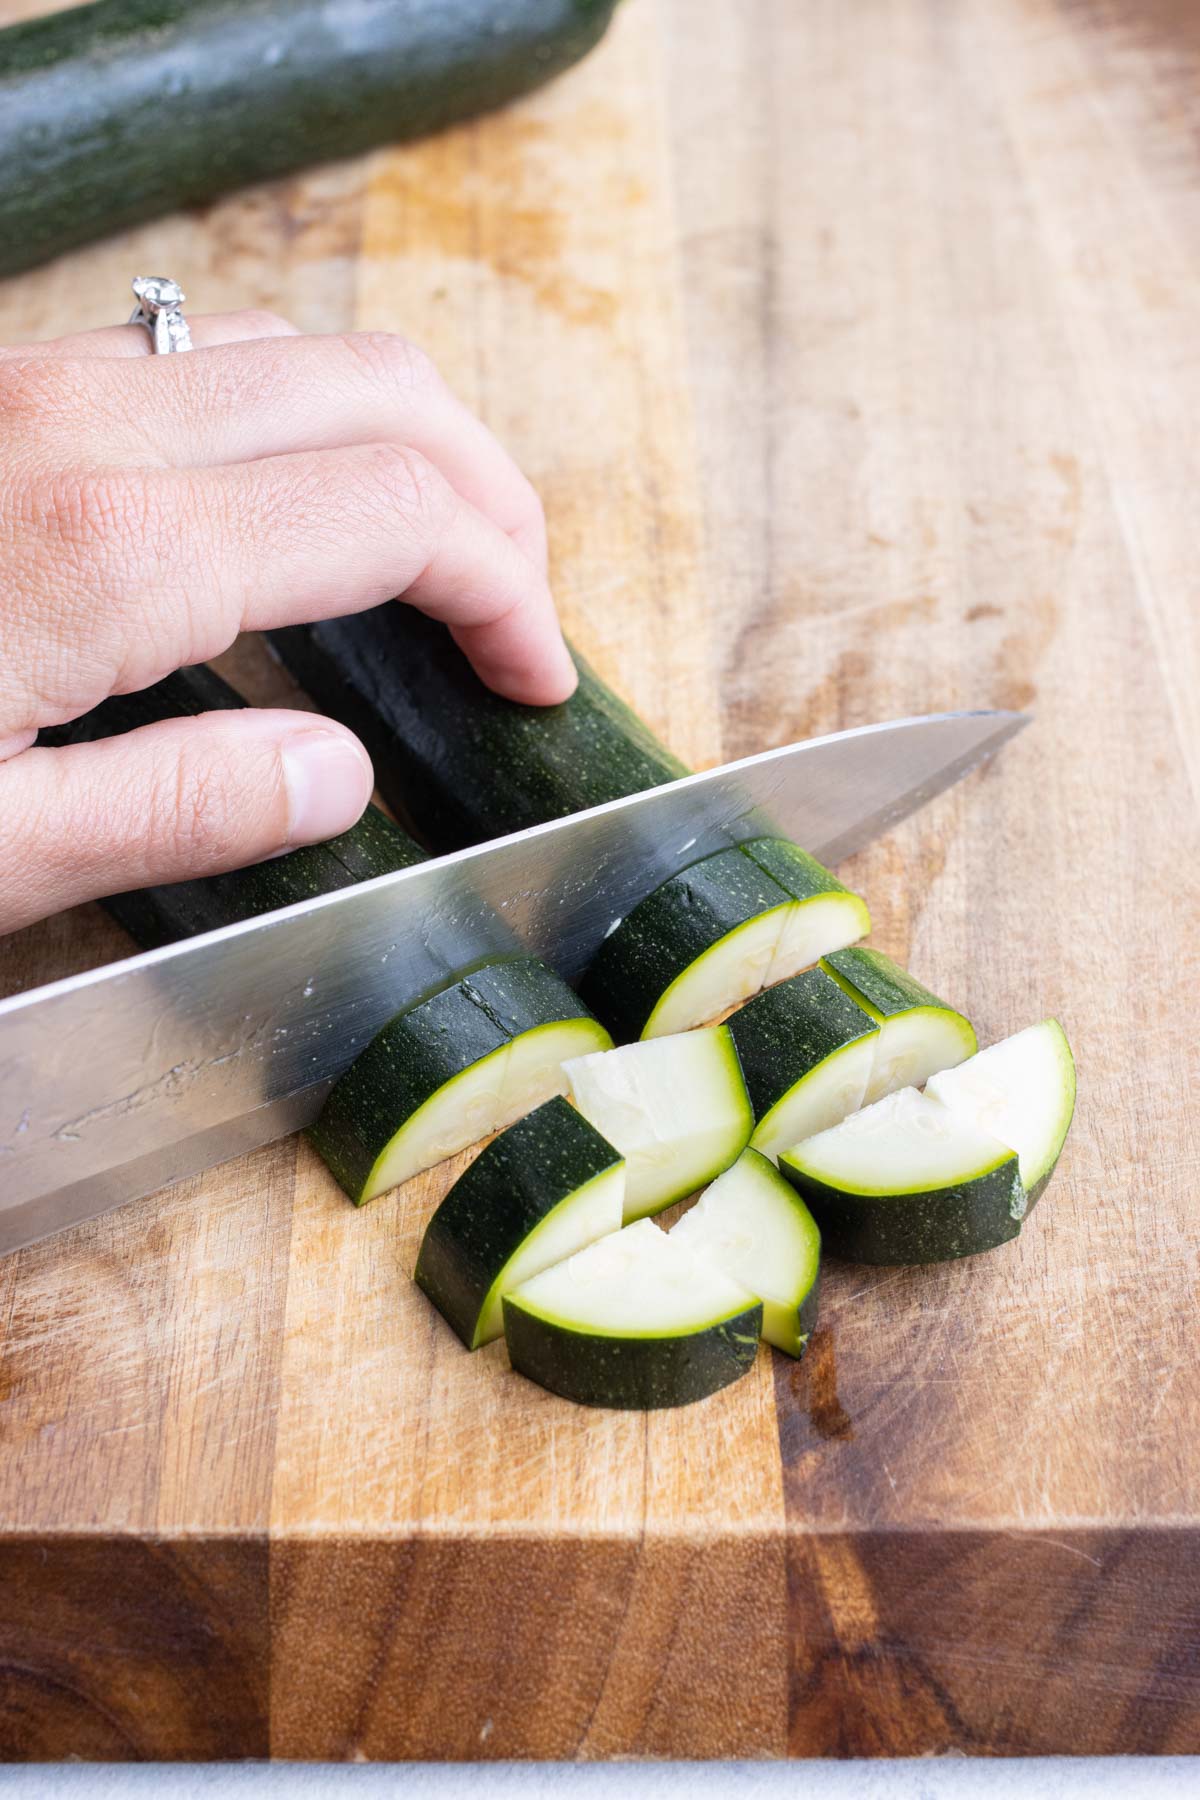 Showing how to slice a zucchini into pieces on a wooden cutting board.